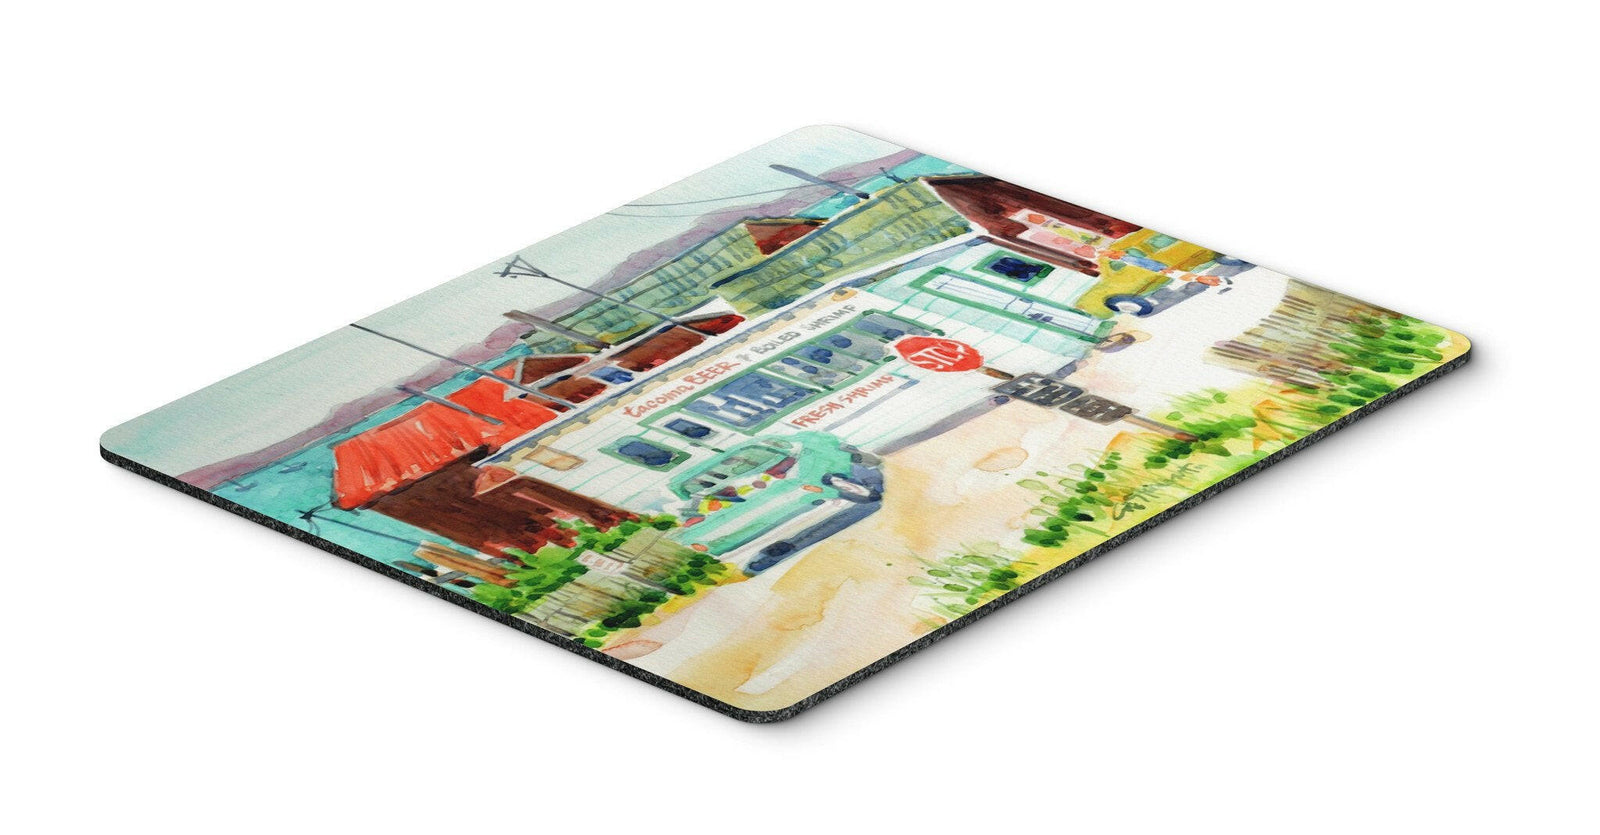 Tacoma Beer and Boiled Shrimp Market Mouse Pad, Hot Pad or Trivet 6141MP by Caroline's Treasures